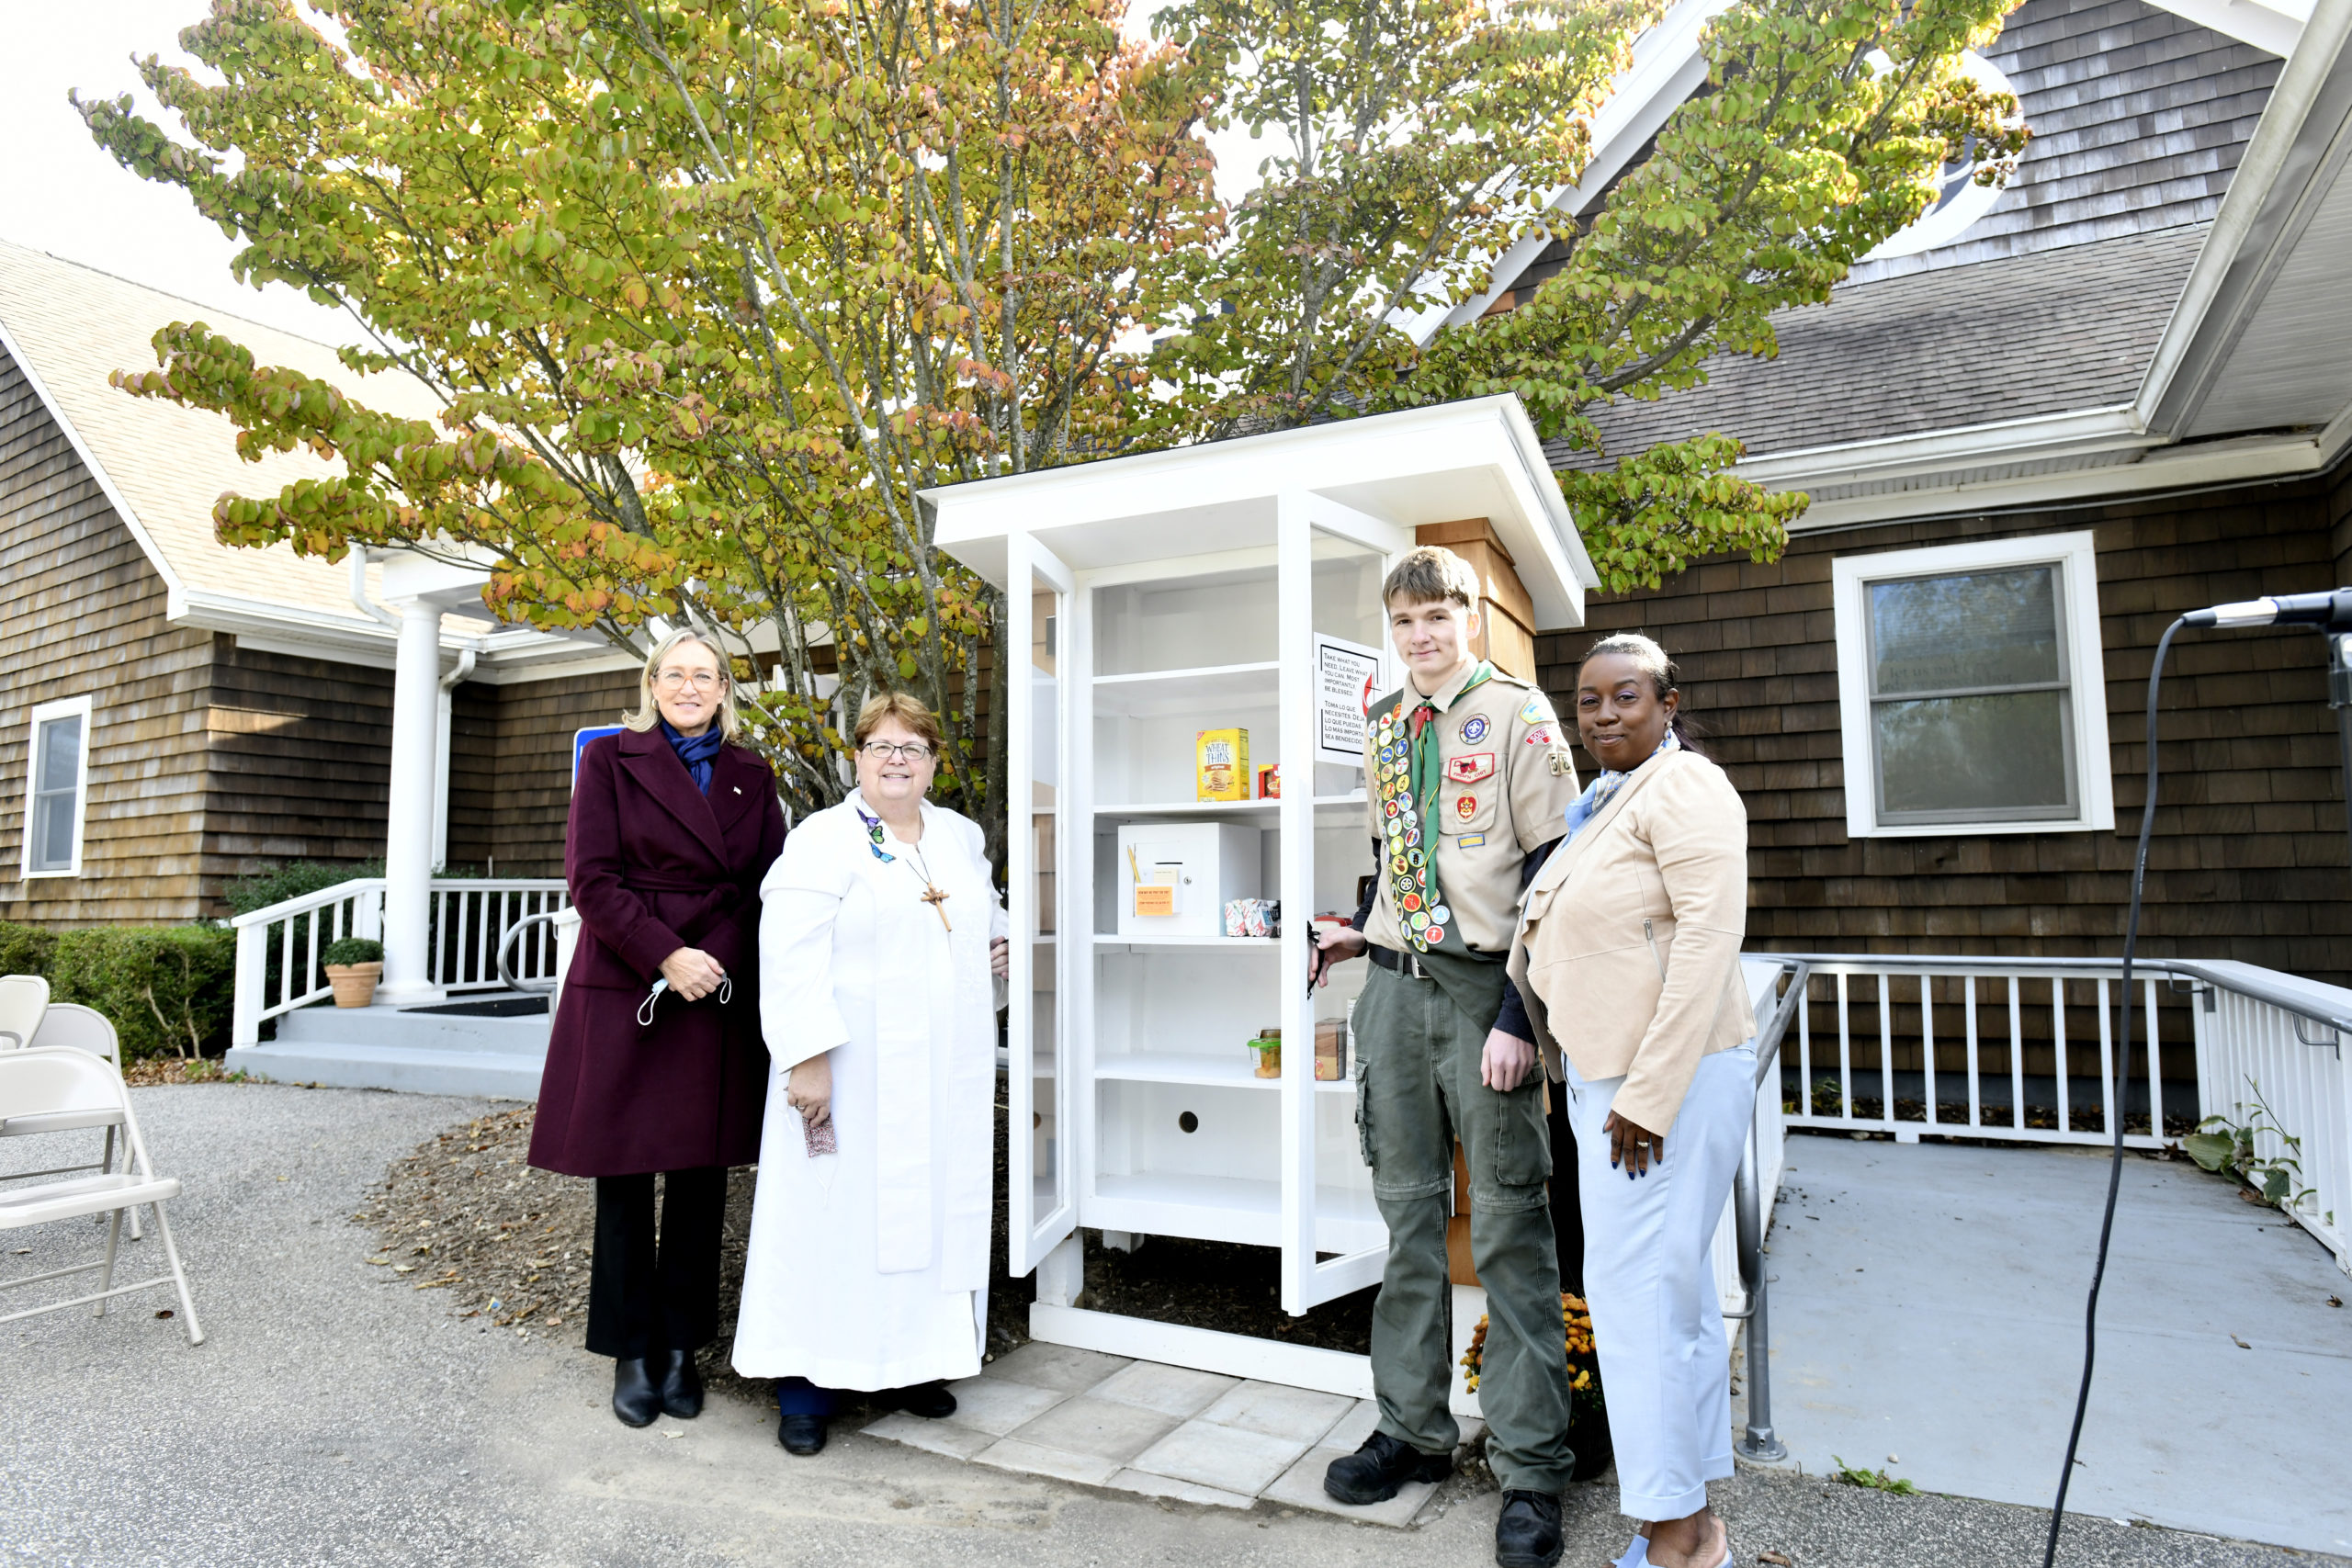 Suffolk County Legislator Bridget Fleming, Rev. Joanne S. Utley, Eagle Scout Jagger Maddock and Southampton Village Trustee Robin Brown  at the dedication of the new “Blessing
Box,” micro food pantry on Sunday at the Hamptons United Methodist Church in Southampton. Jagger Maddock constructed this “micro food pantry” as an Eagle Scout project, with the help of the leaders and other scouts of Troop 58.   DANA SHAW